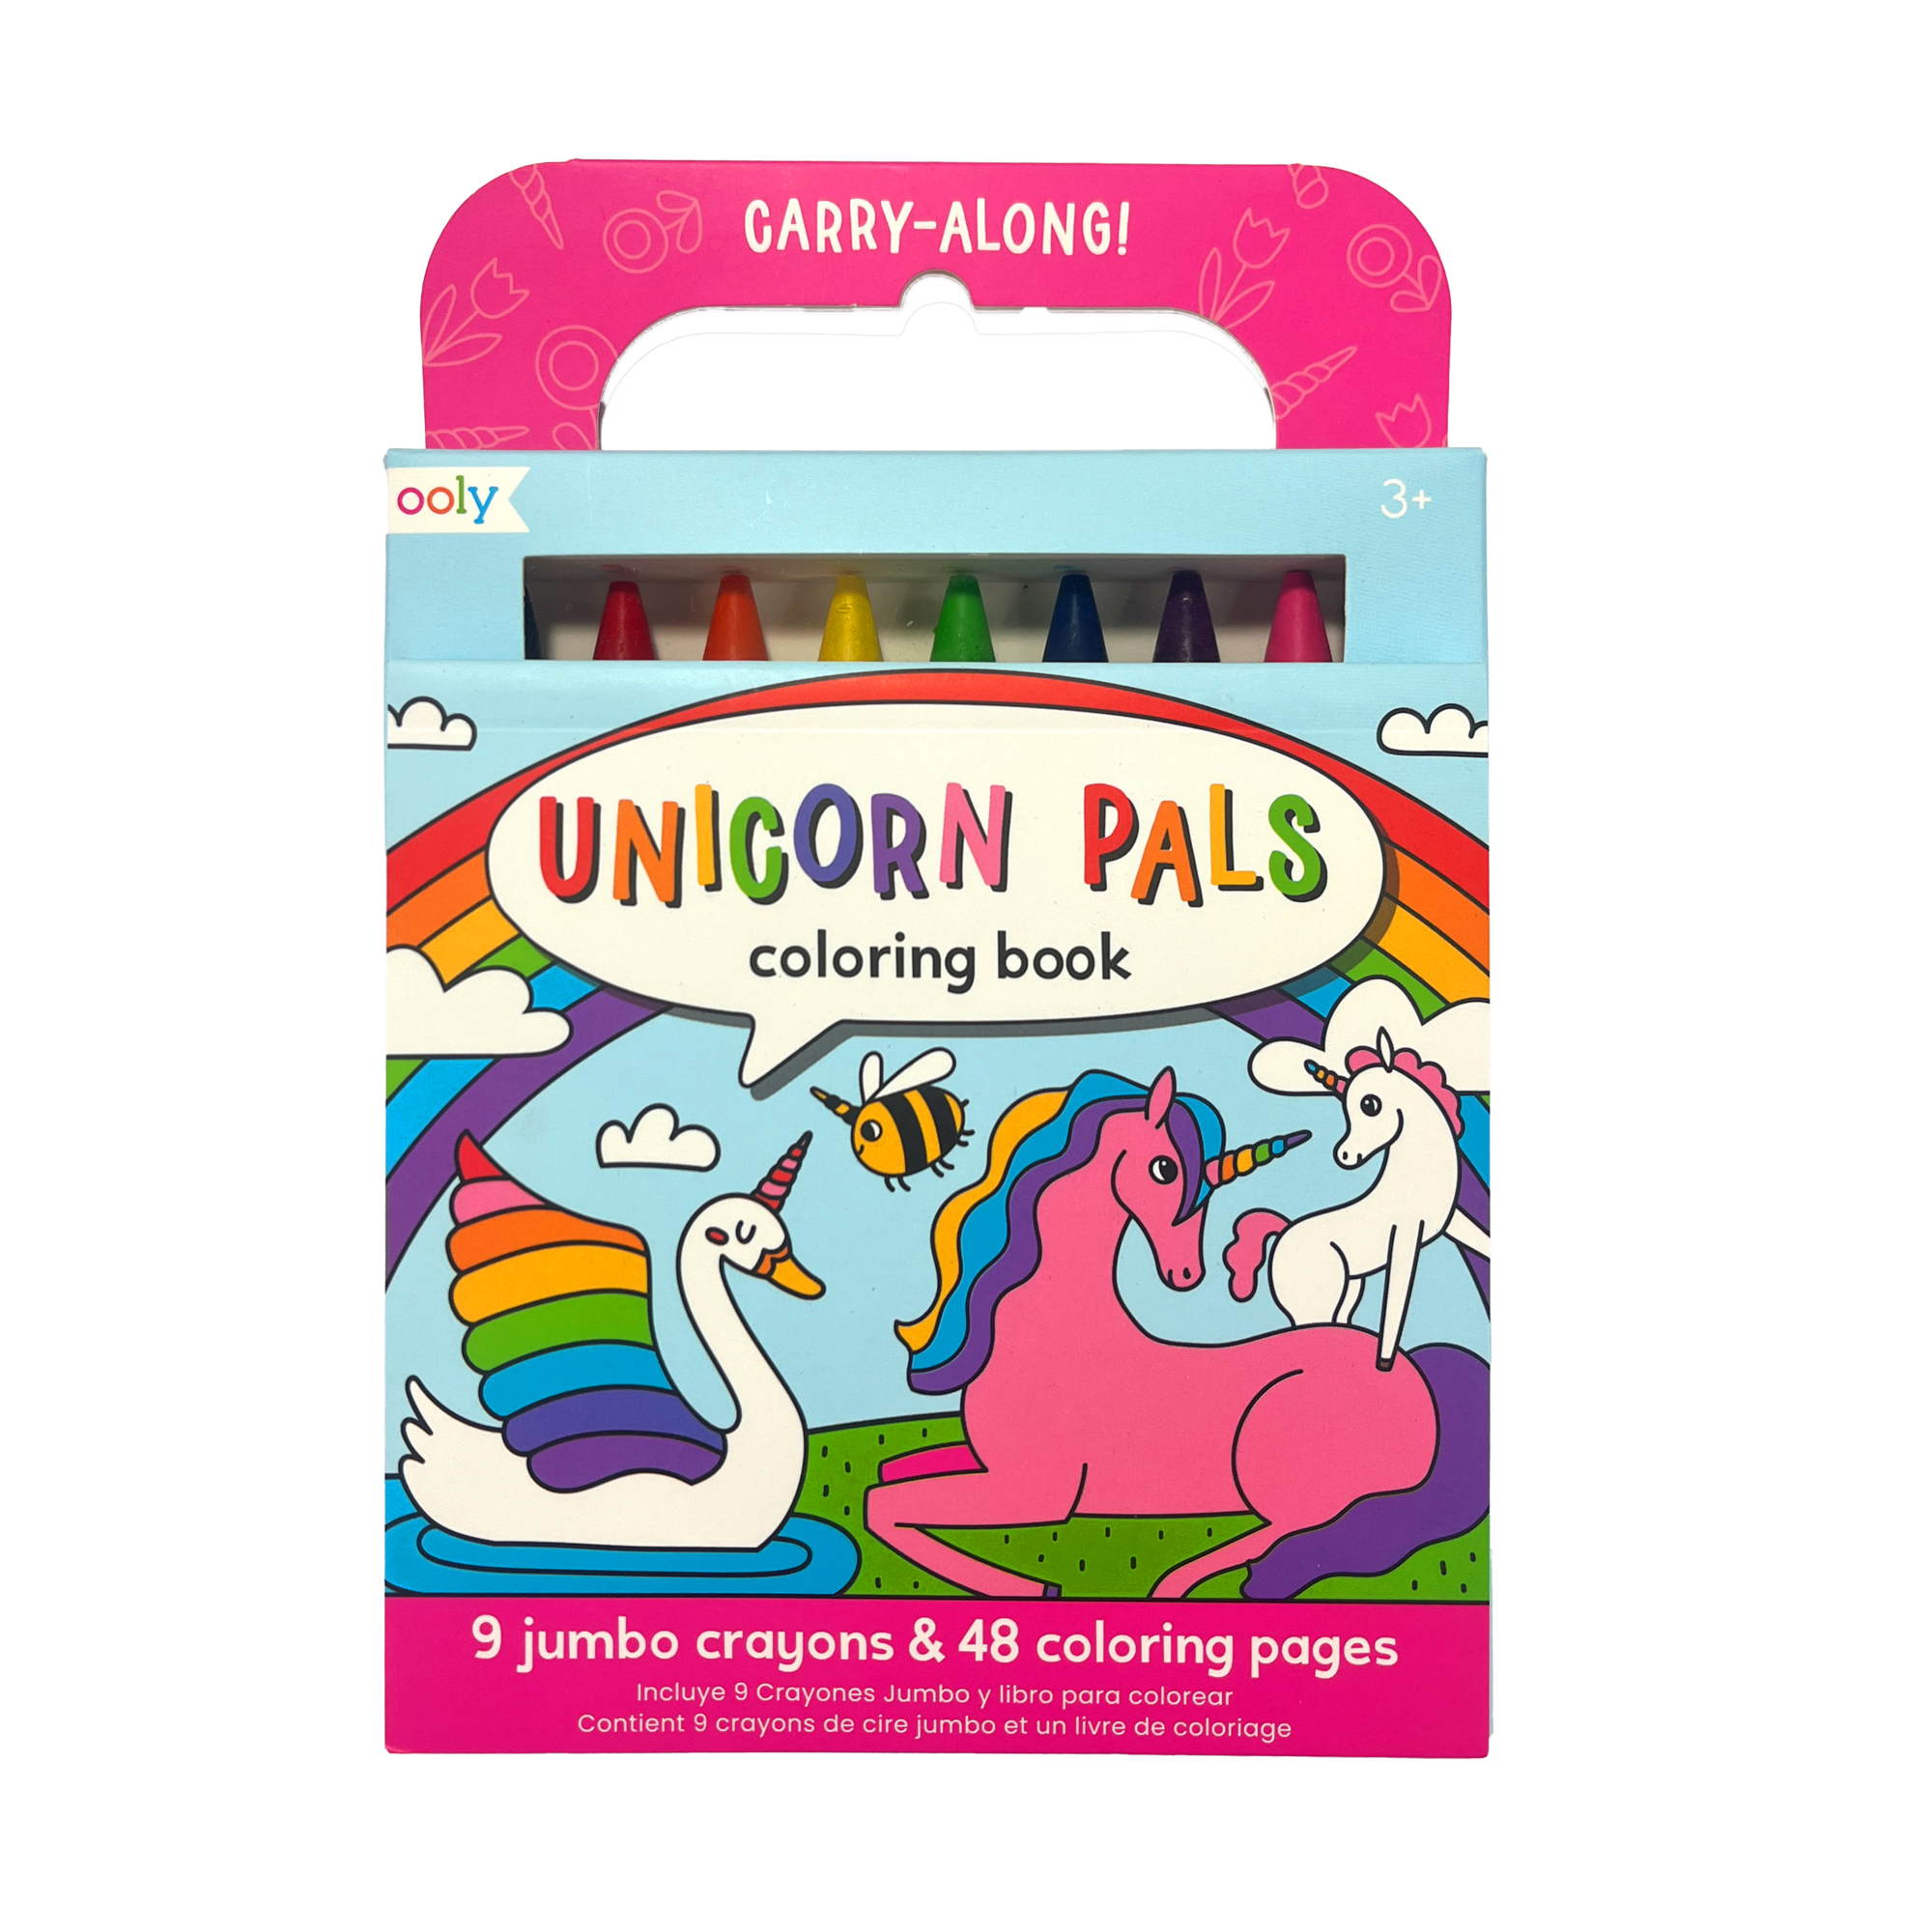 OOLY Carry Along! Coloring Book and Crayon Set - Unicorn Pals front of packaging